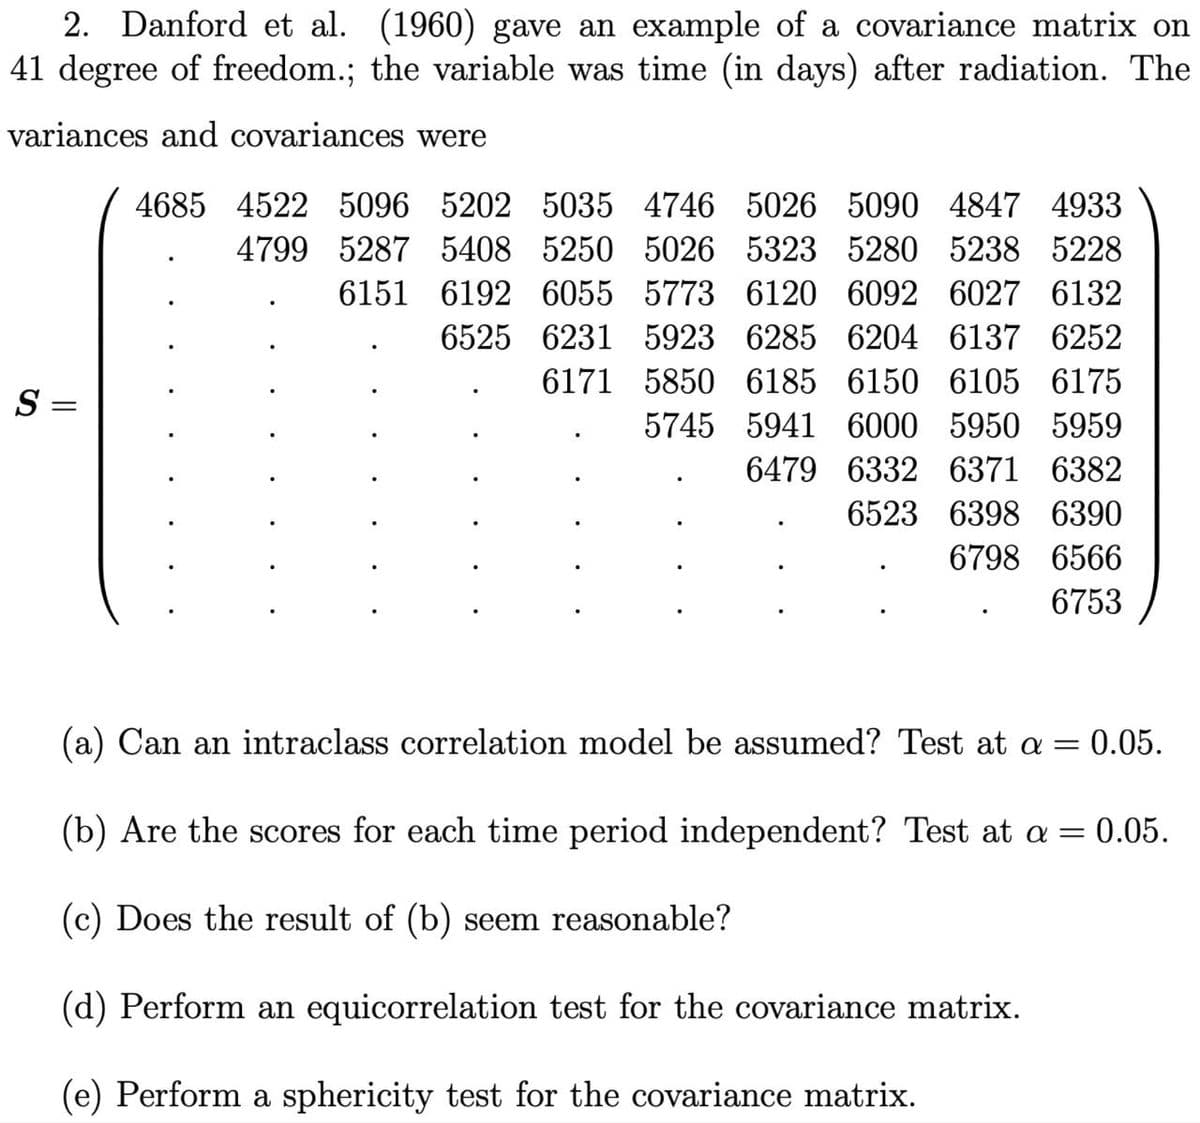 2. Danford et al. (1960) gave an example of a covariance matrix on
41 degree of freedom.; the variable was time (in days) after radiation. The
variances and covariances were
S =
4685 4522 5096 5202 5035 4746 5026 5090 4847 4933
4799 5287 5408 5250 5026 5323 5280 5238 5228
6151
6192 6055 5773 6120 6092 6027 6132
6525 6231 5923 6285 6204 6137 6252
6171 5850 6185 6150 6105 6175
5745 5941 6000 5950 5959
6479
6332 6371 6382
6523 6398 6390
6798 6566
6753
(a) Can an intraclass correlation model be assumed? Test at α = 0.05.
(b) Are the scores for each time period independent? Test at a = = 0.05.
(c) Does the result of (b) seem reasonable?
(d) Perform an equicorrelation test for the covariance matrix.
(e) Perform a sphericity test for the covariance matrix.